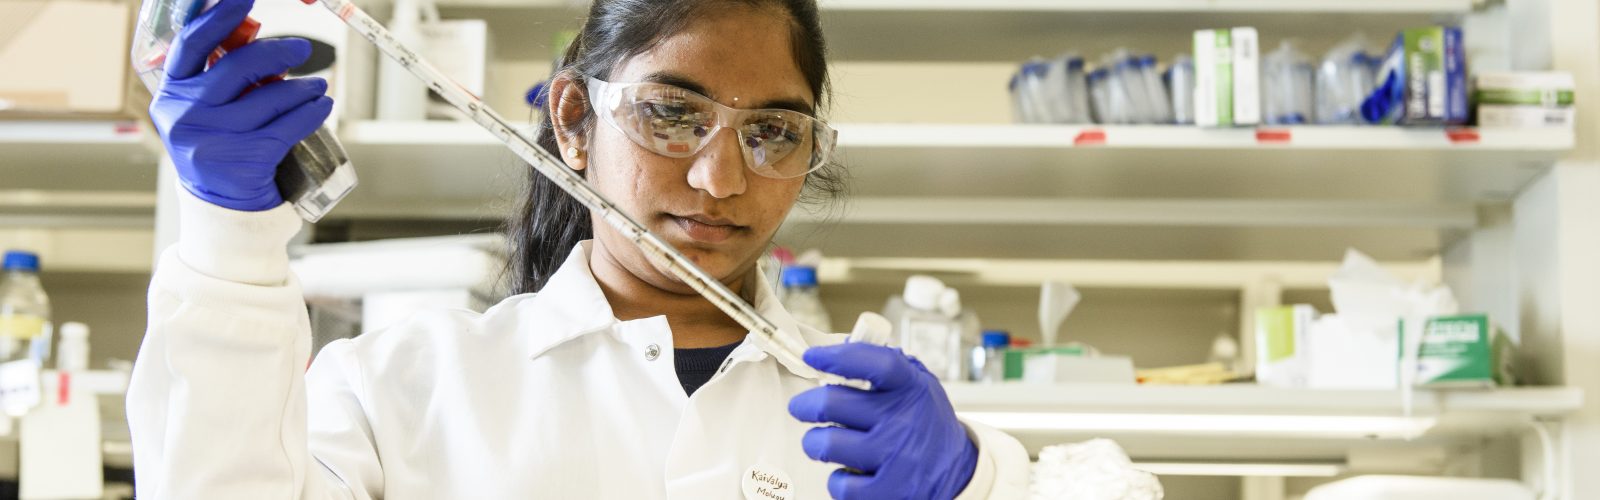 Kalvalya Molugu, graduate student at the University of Wisconsin-Madison, works with stem cells in a lab at the Wisconsin Institute for Discovery